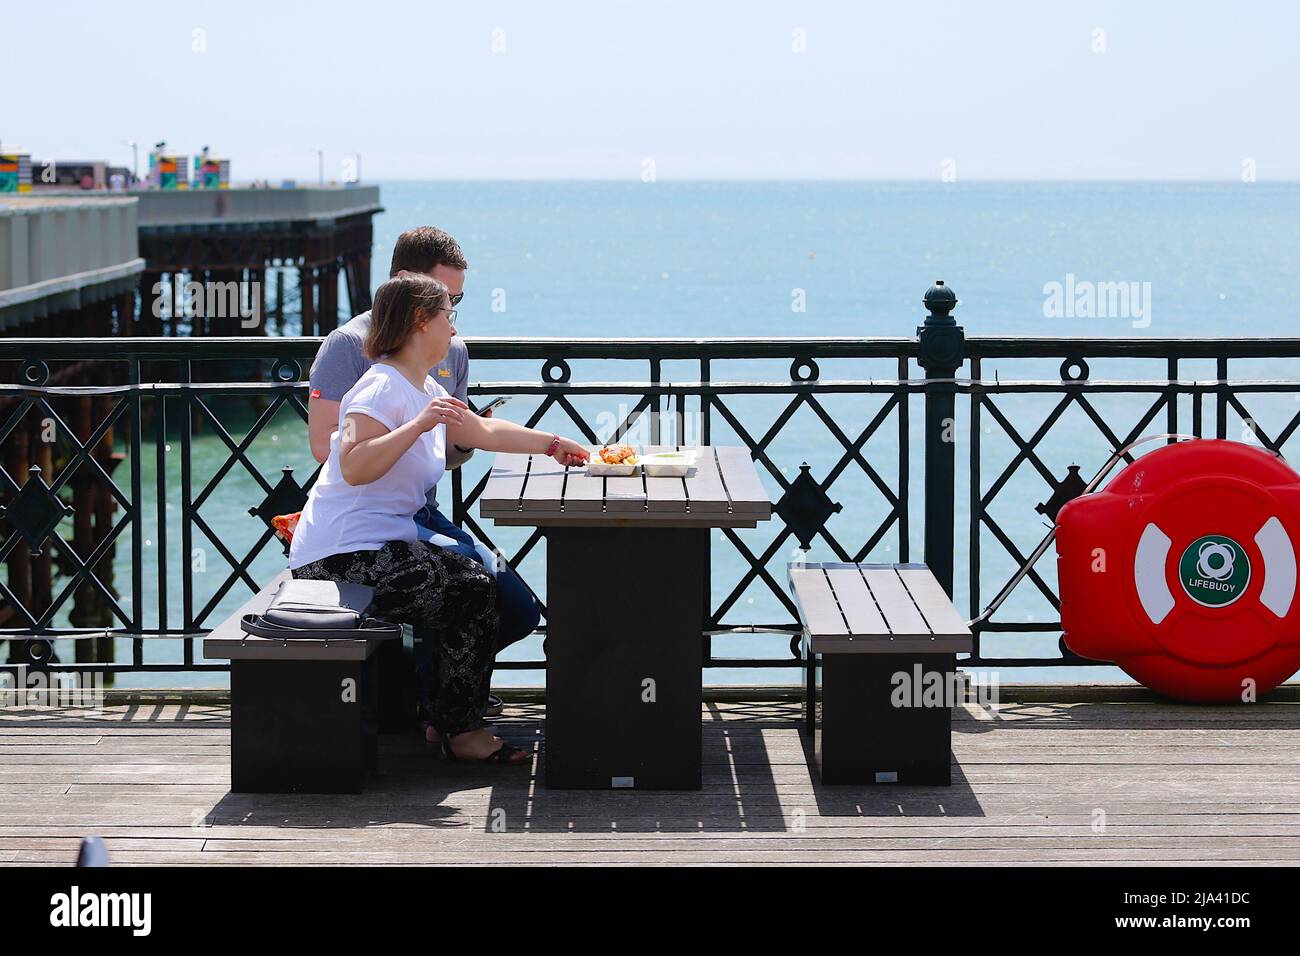 Hastings, East Sussex, UK. 27 May, 2022. UK Weather: Sunny intervals in the seaside town of Hastings in East Sussex as Brits enjoy the warm weather today along the seafront promenade. A couple eating fish and chips on the Hastings pier. Photo Credit: Paul Lawrenson /Alamy Live News Stock Photo